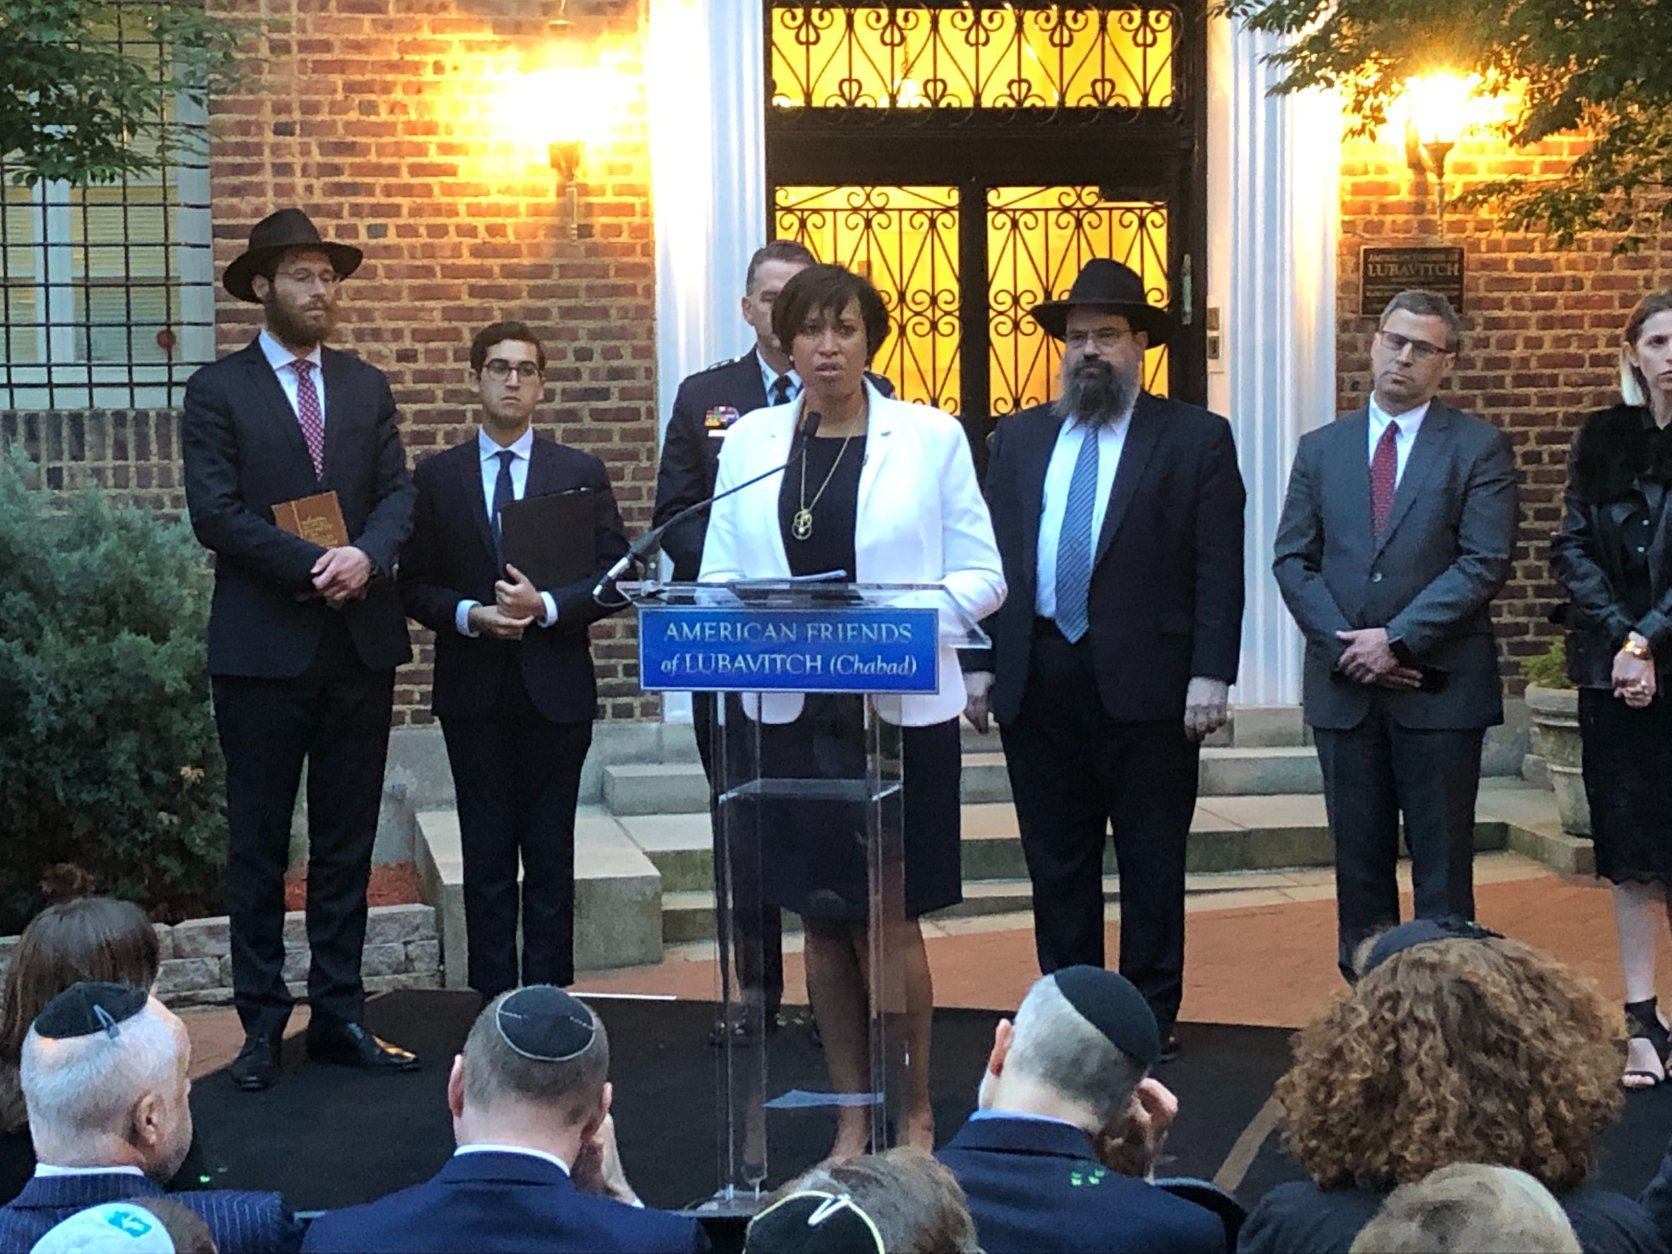 D.C. Mayor Muriel Bowser speaks at American Friends of Lubavitch vigil. (WTOP/Mike Murillo)